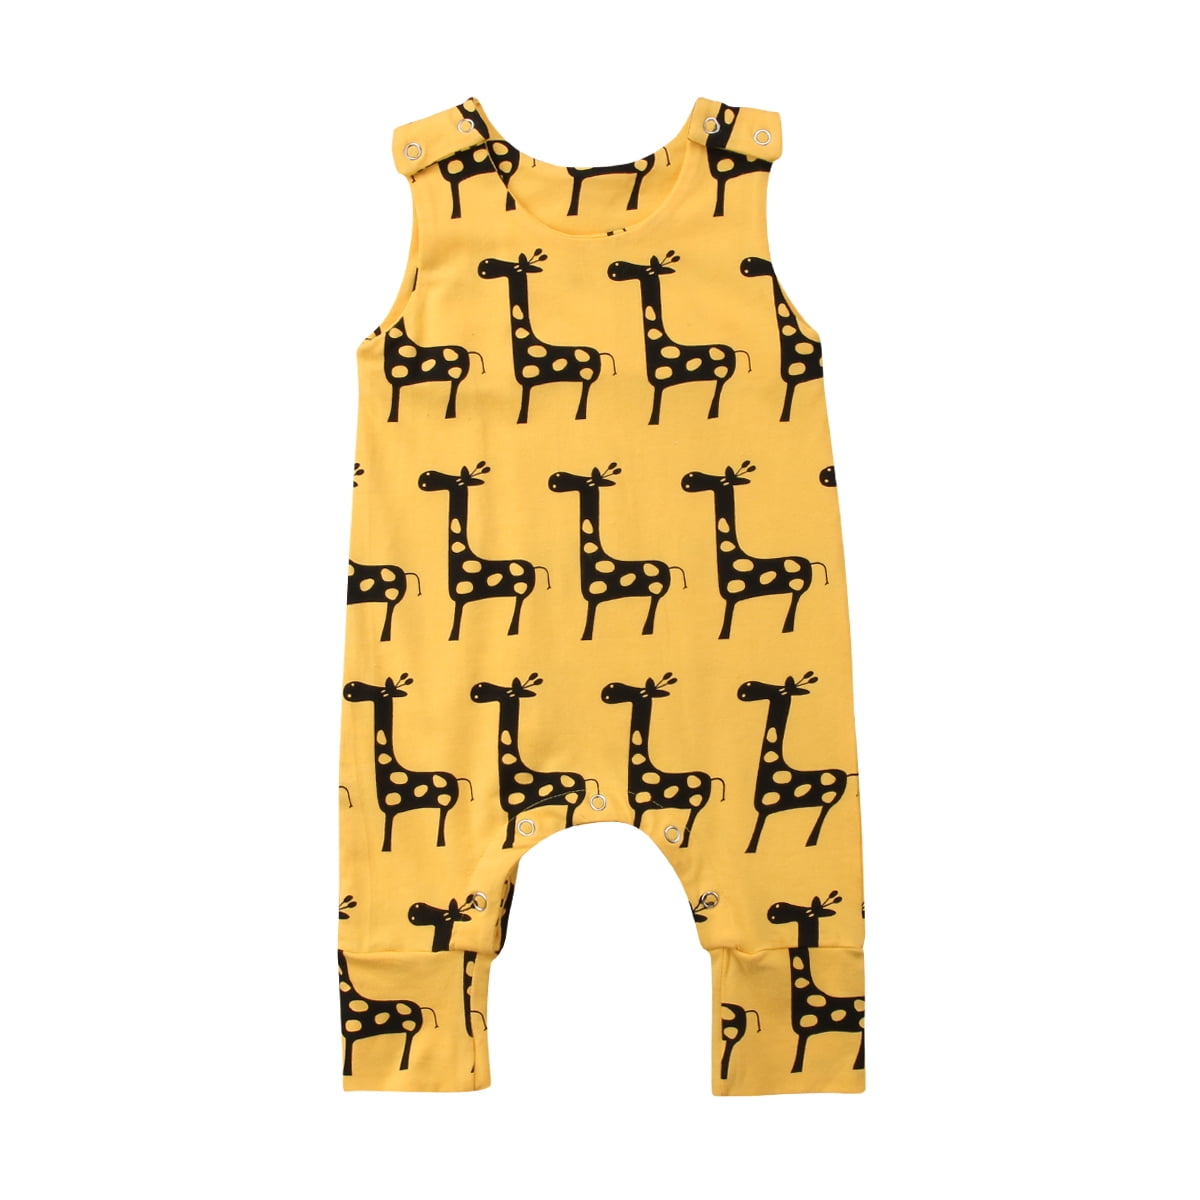 Newborn Infant Baby Girl Boy Cartoon Sleeveless Romper Jumpsuit Outfits Clothes